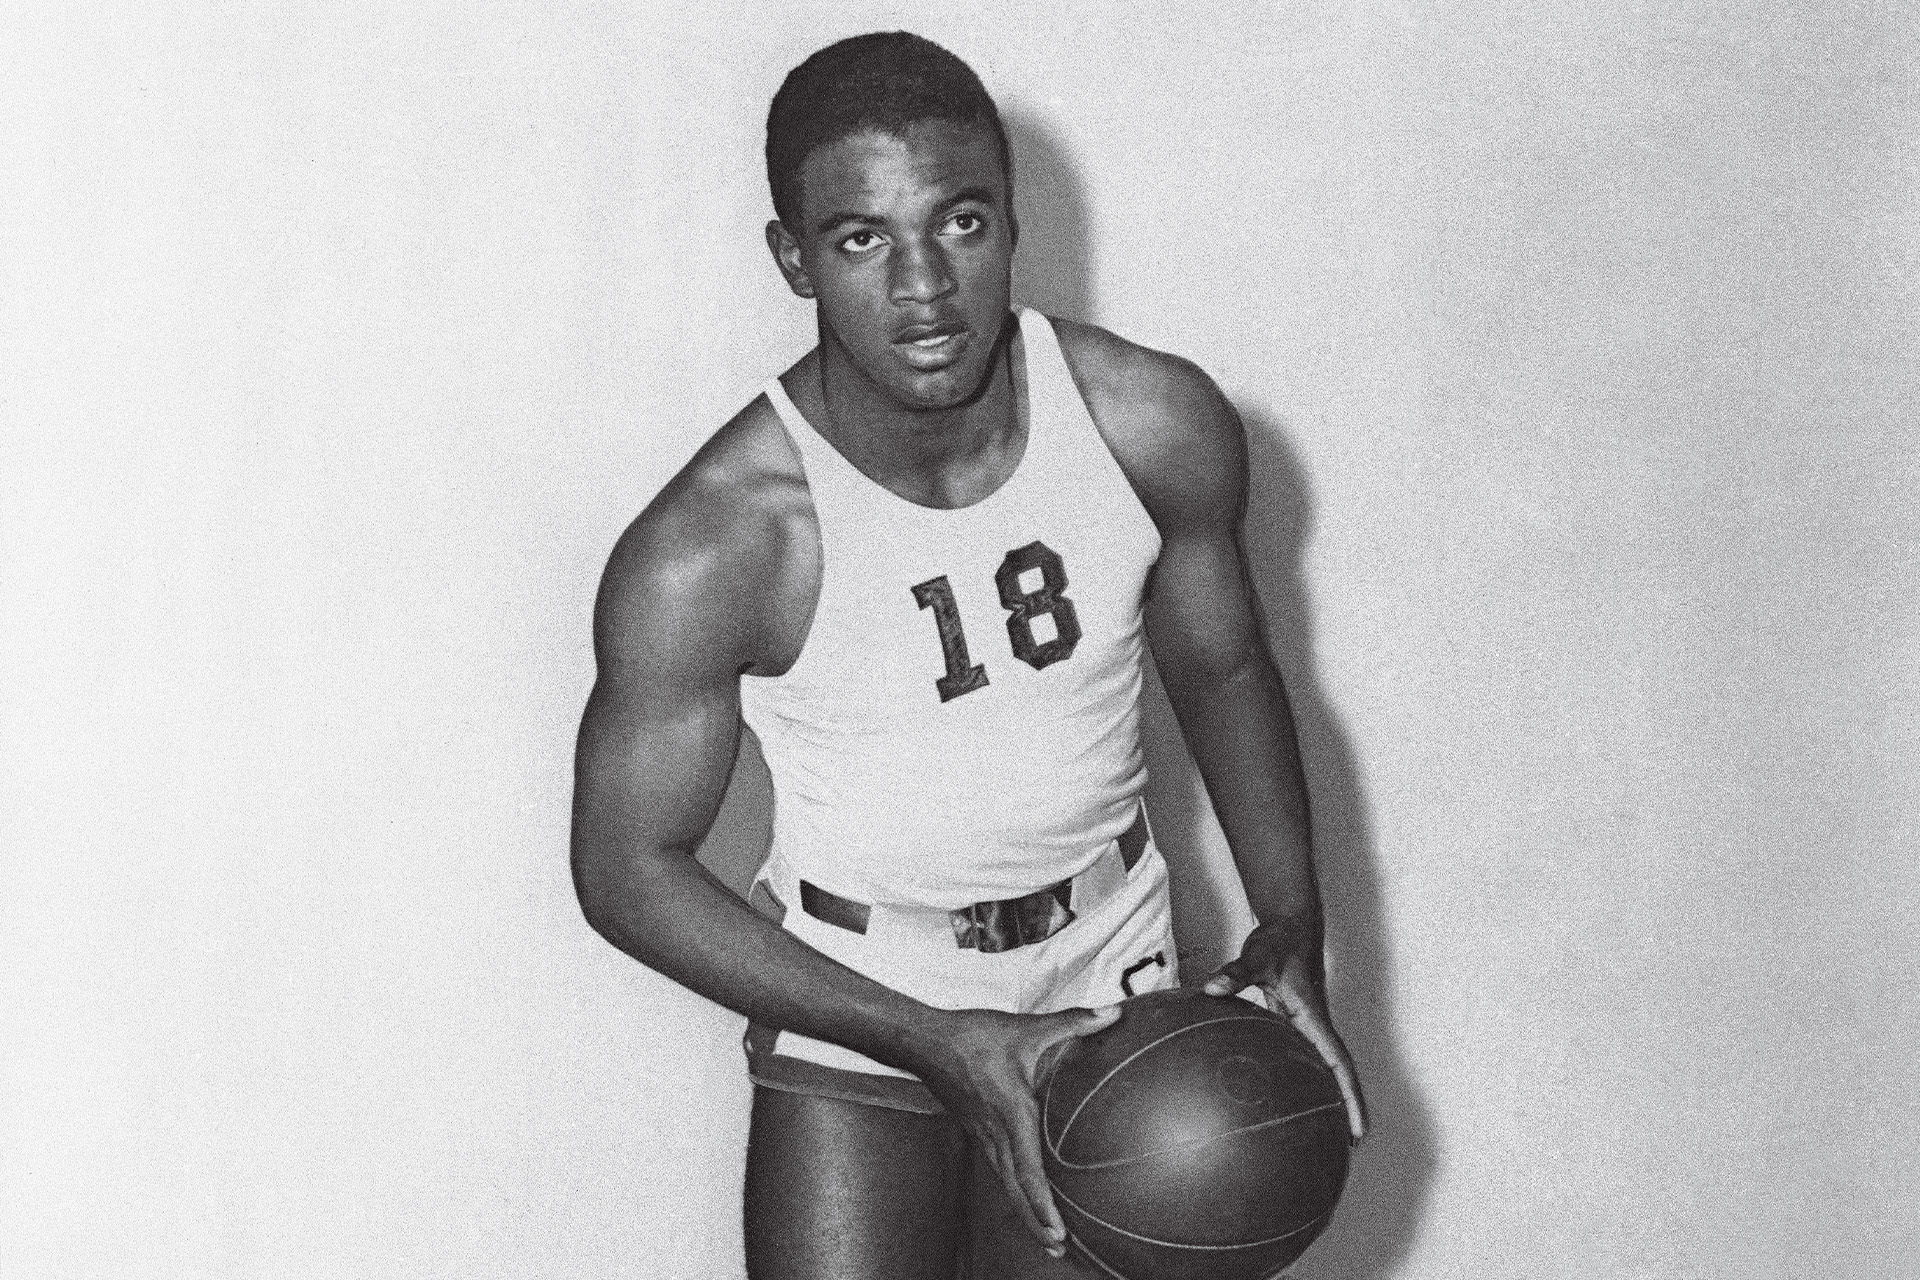 Here's a Look Back on Jackie Robinson's Basketball Career at UCLA